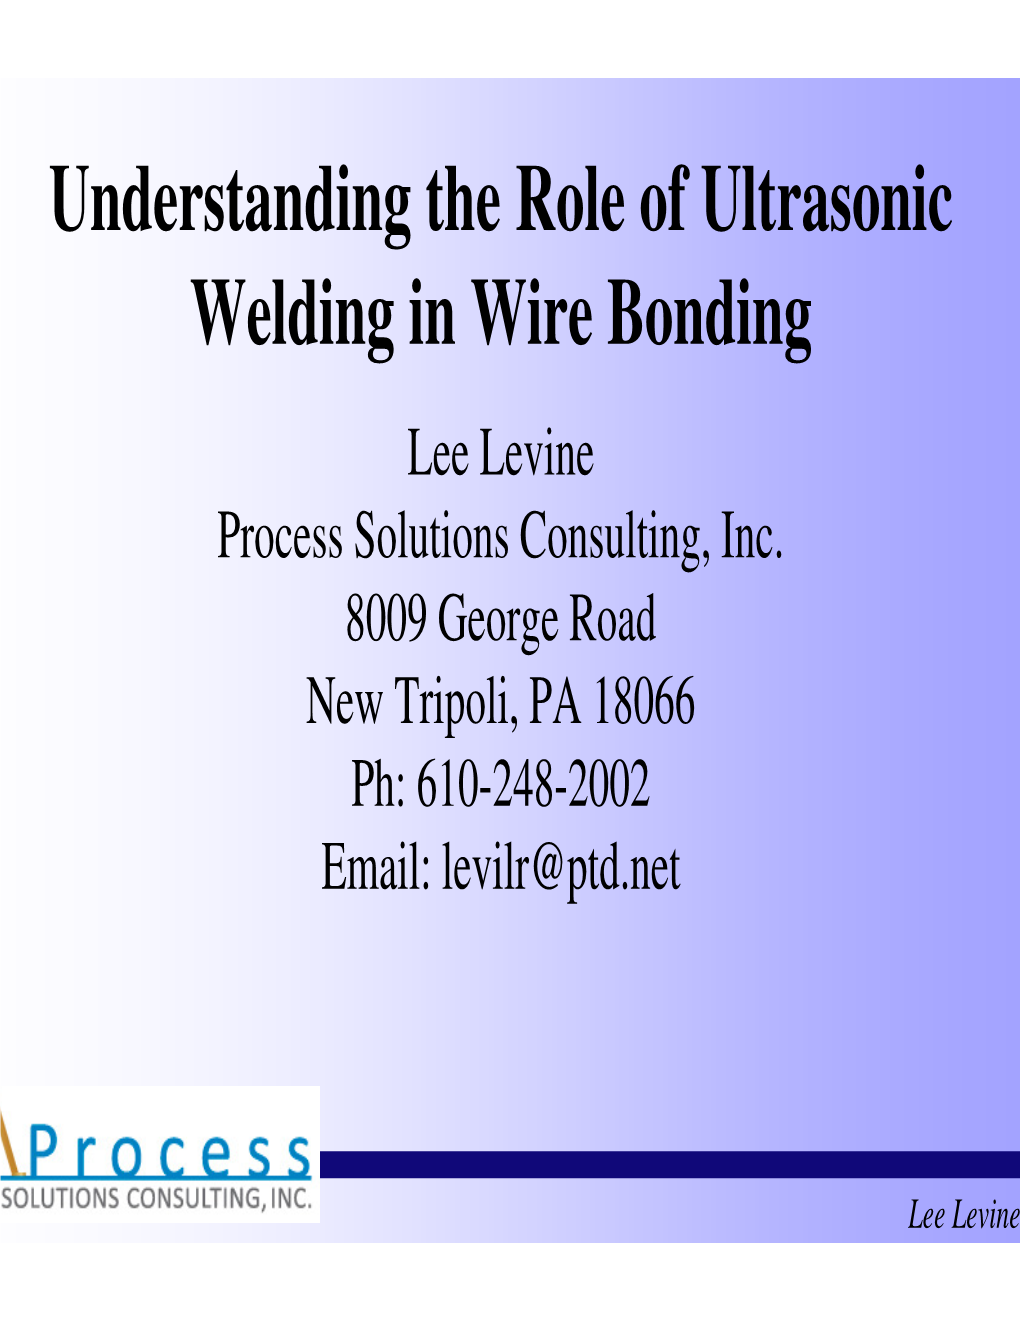 Understanding the Role of Ultrasonic Welding in Wire Bonding Lee Levine Process Solutions Consulting, Inc